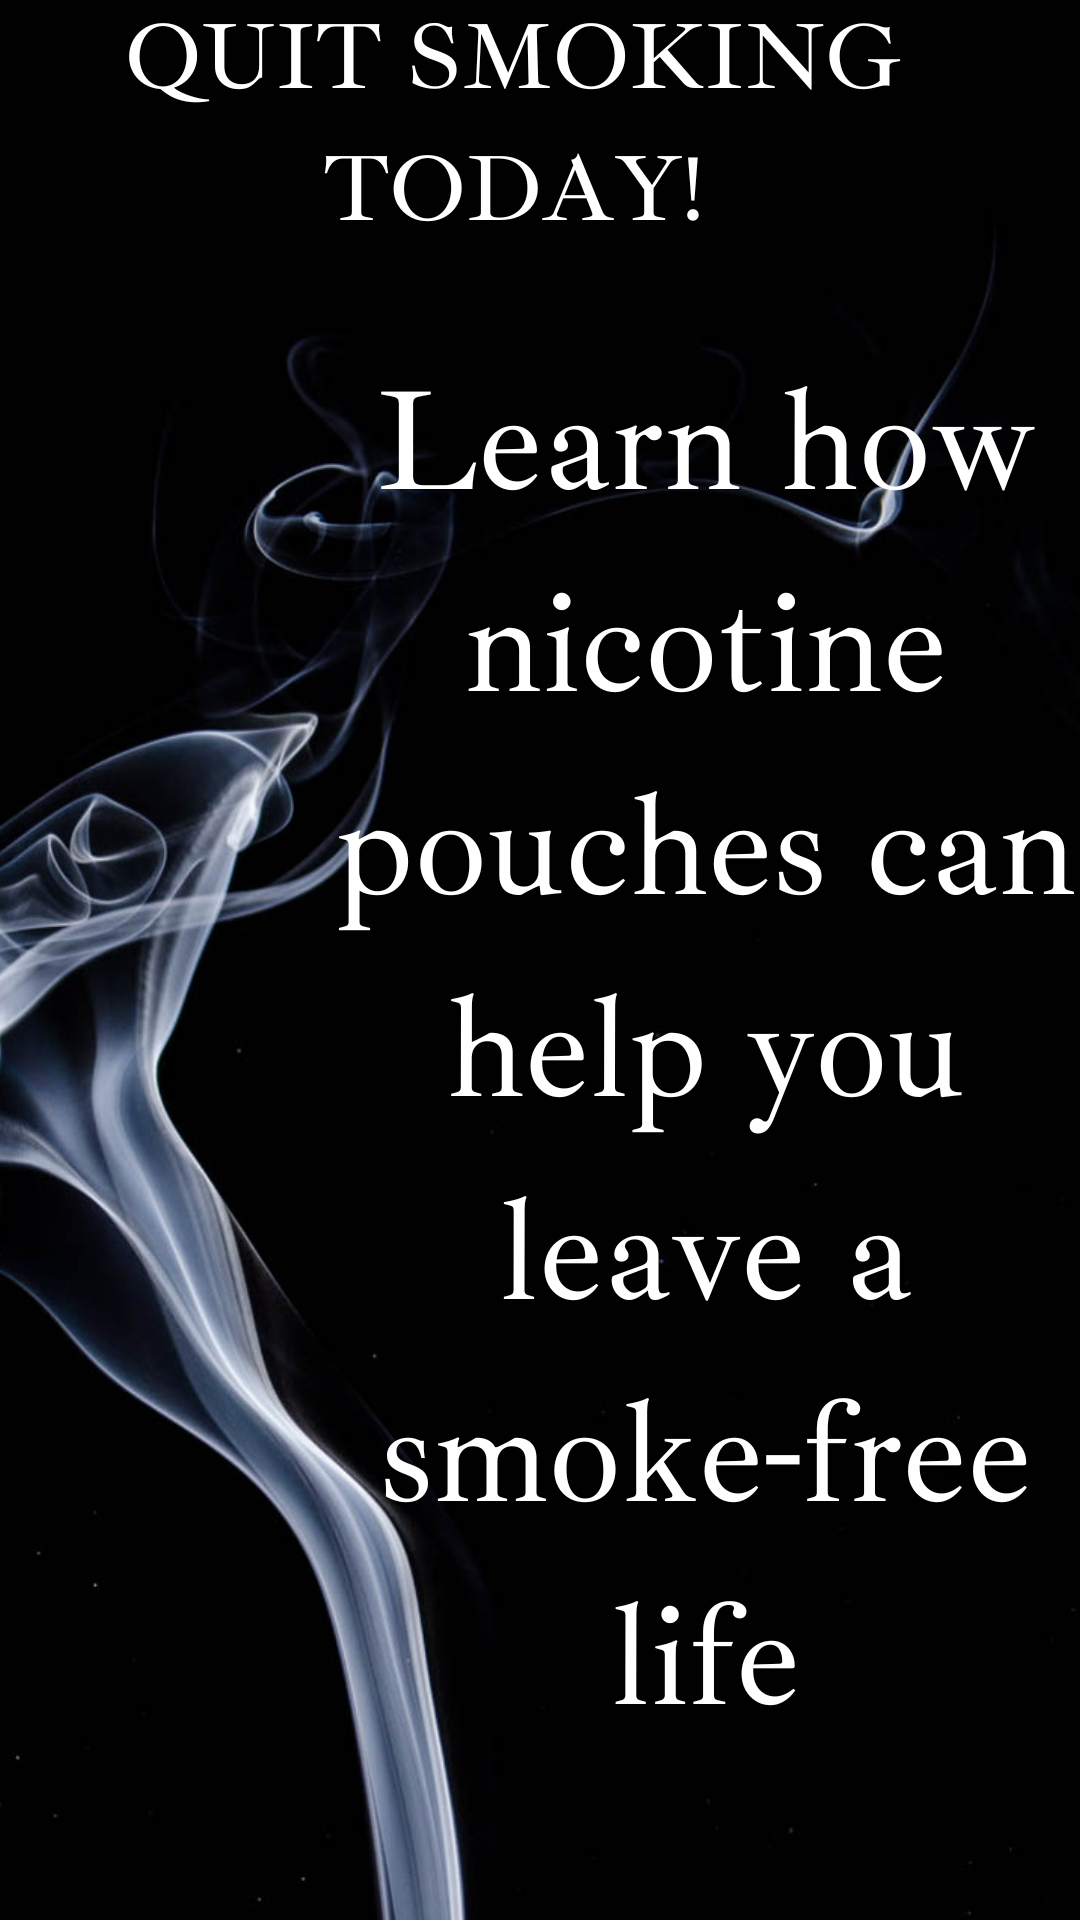 Learn how nicotine pouches can help you leave a smoke-free life